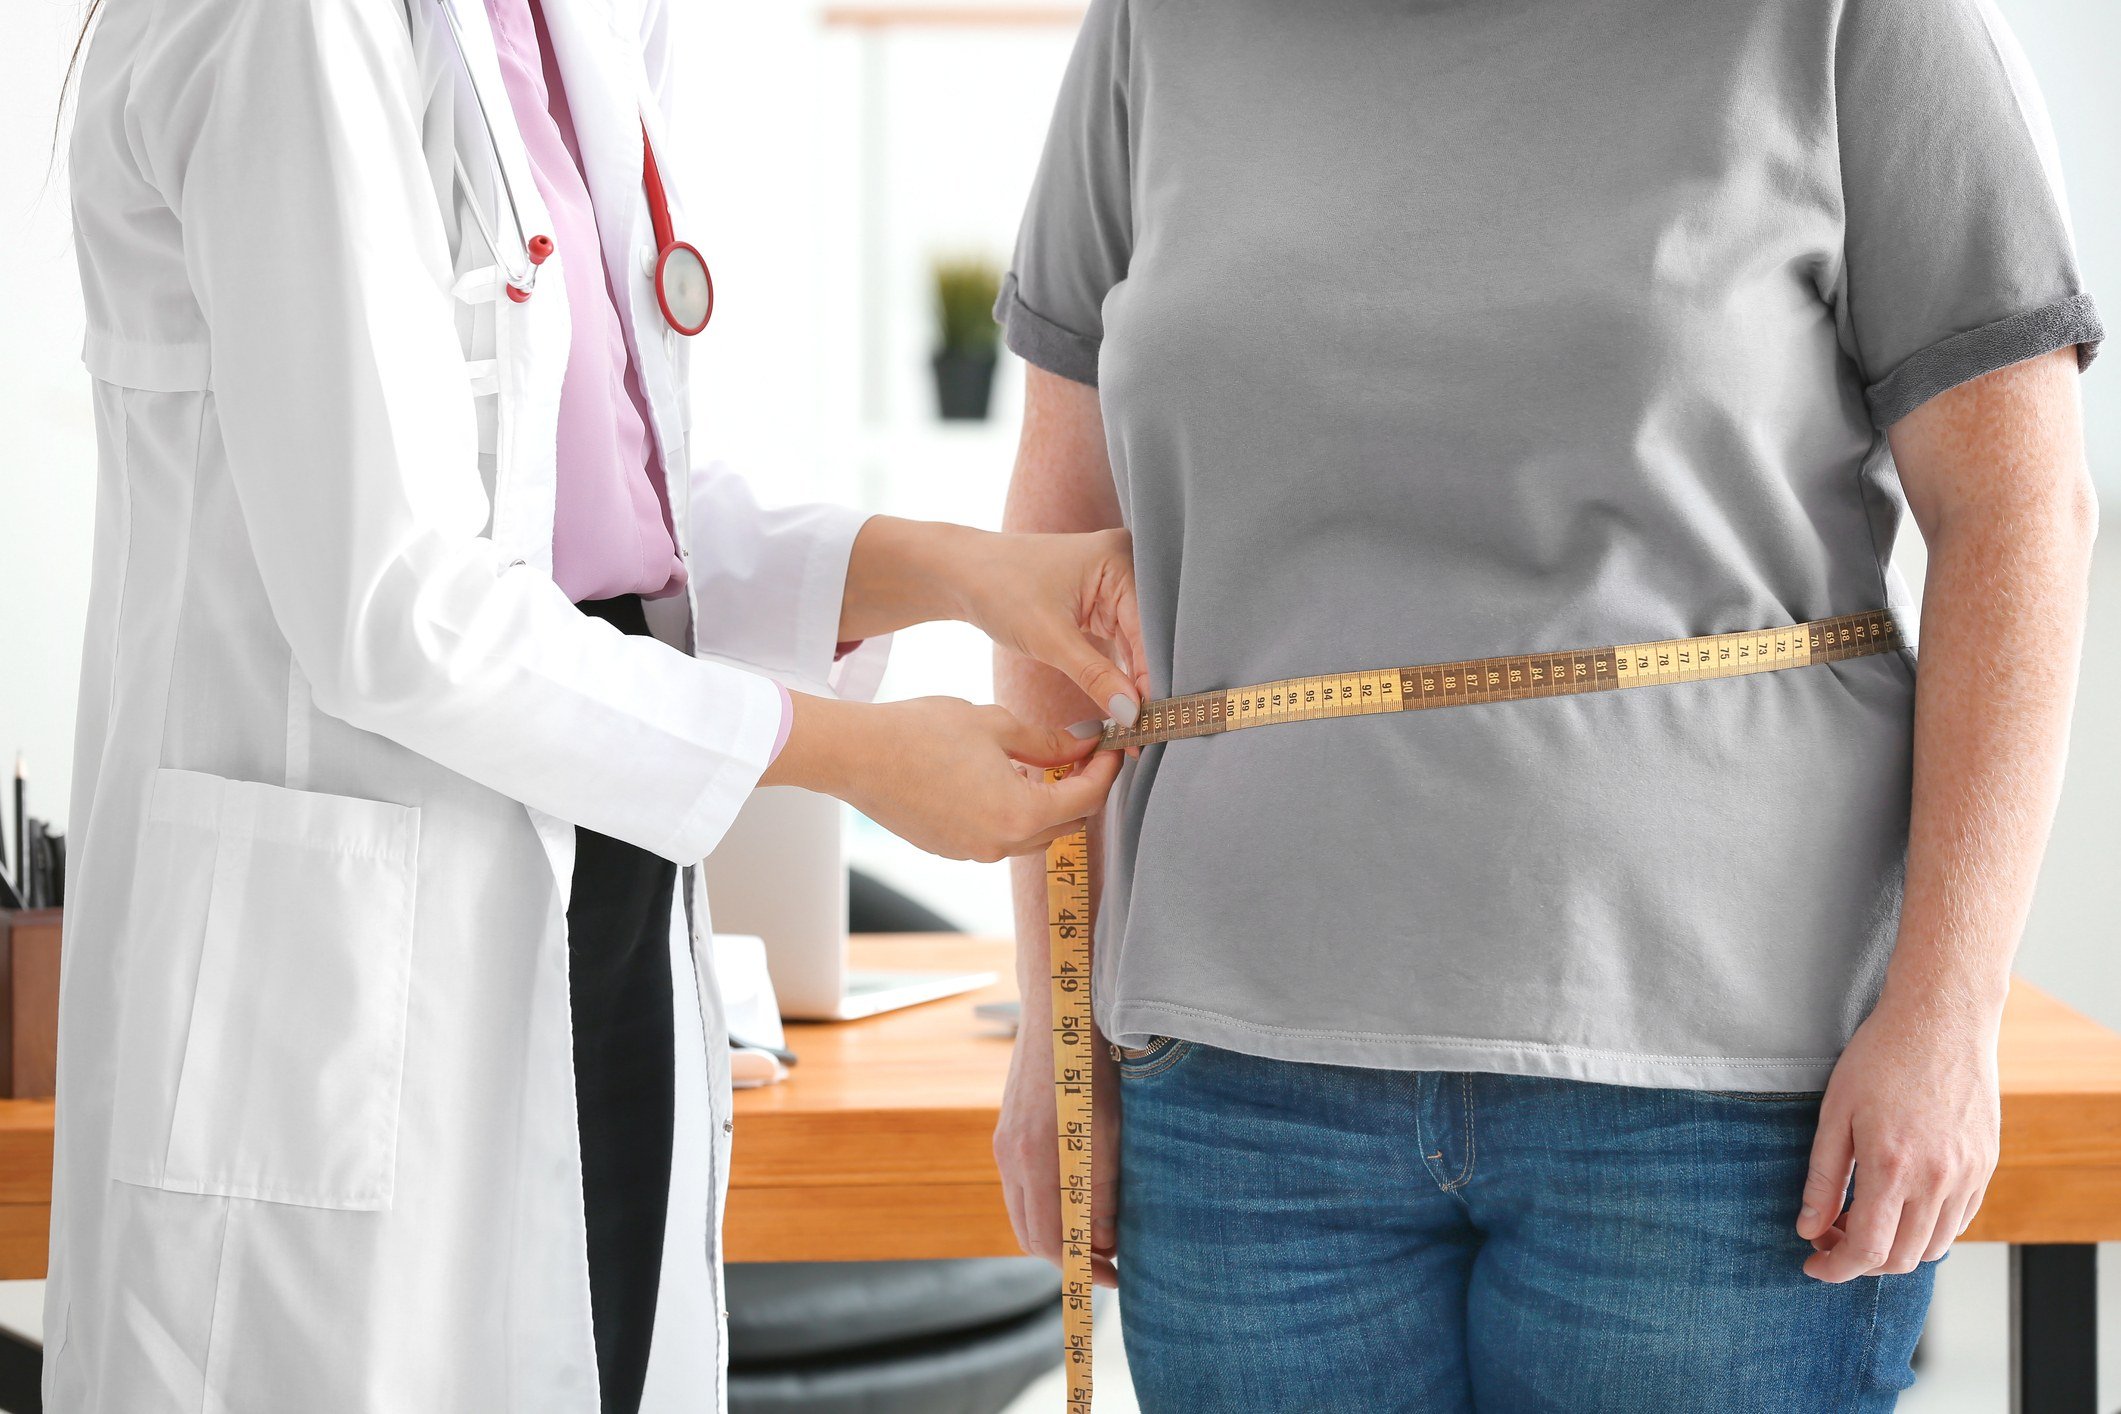 An overweight woman visits a doctor.